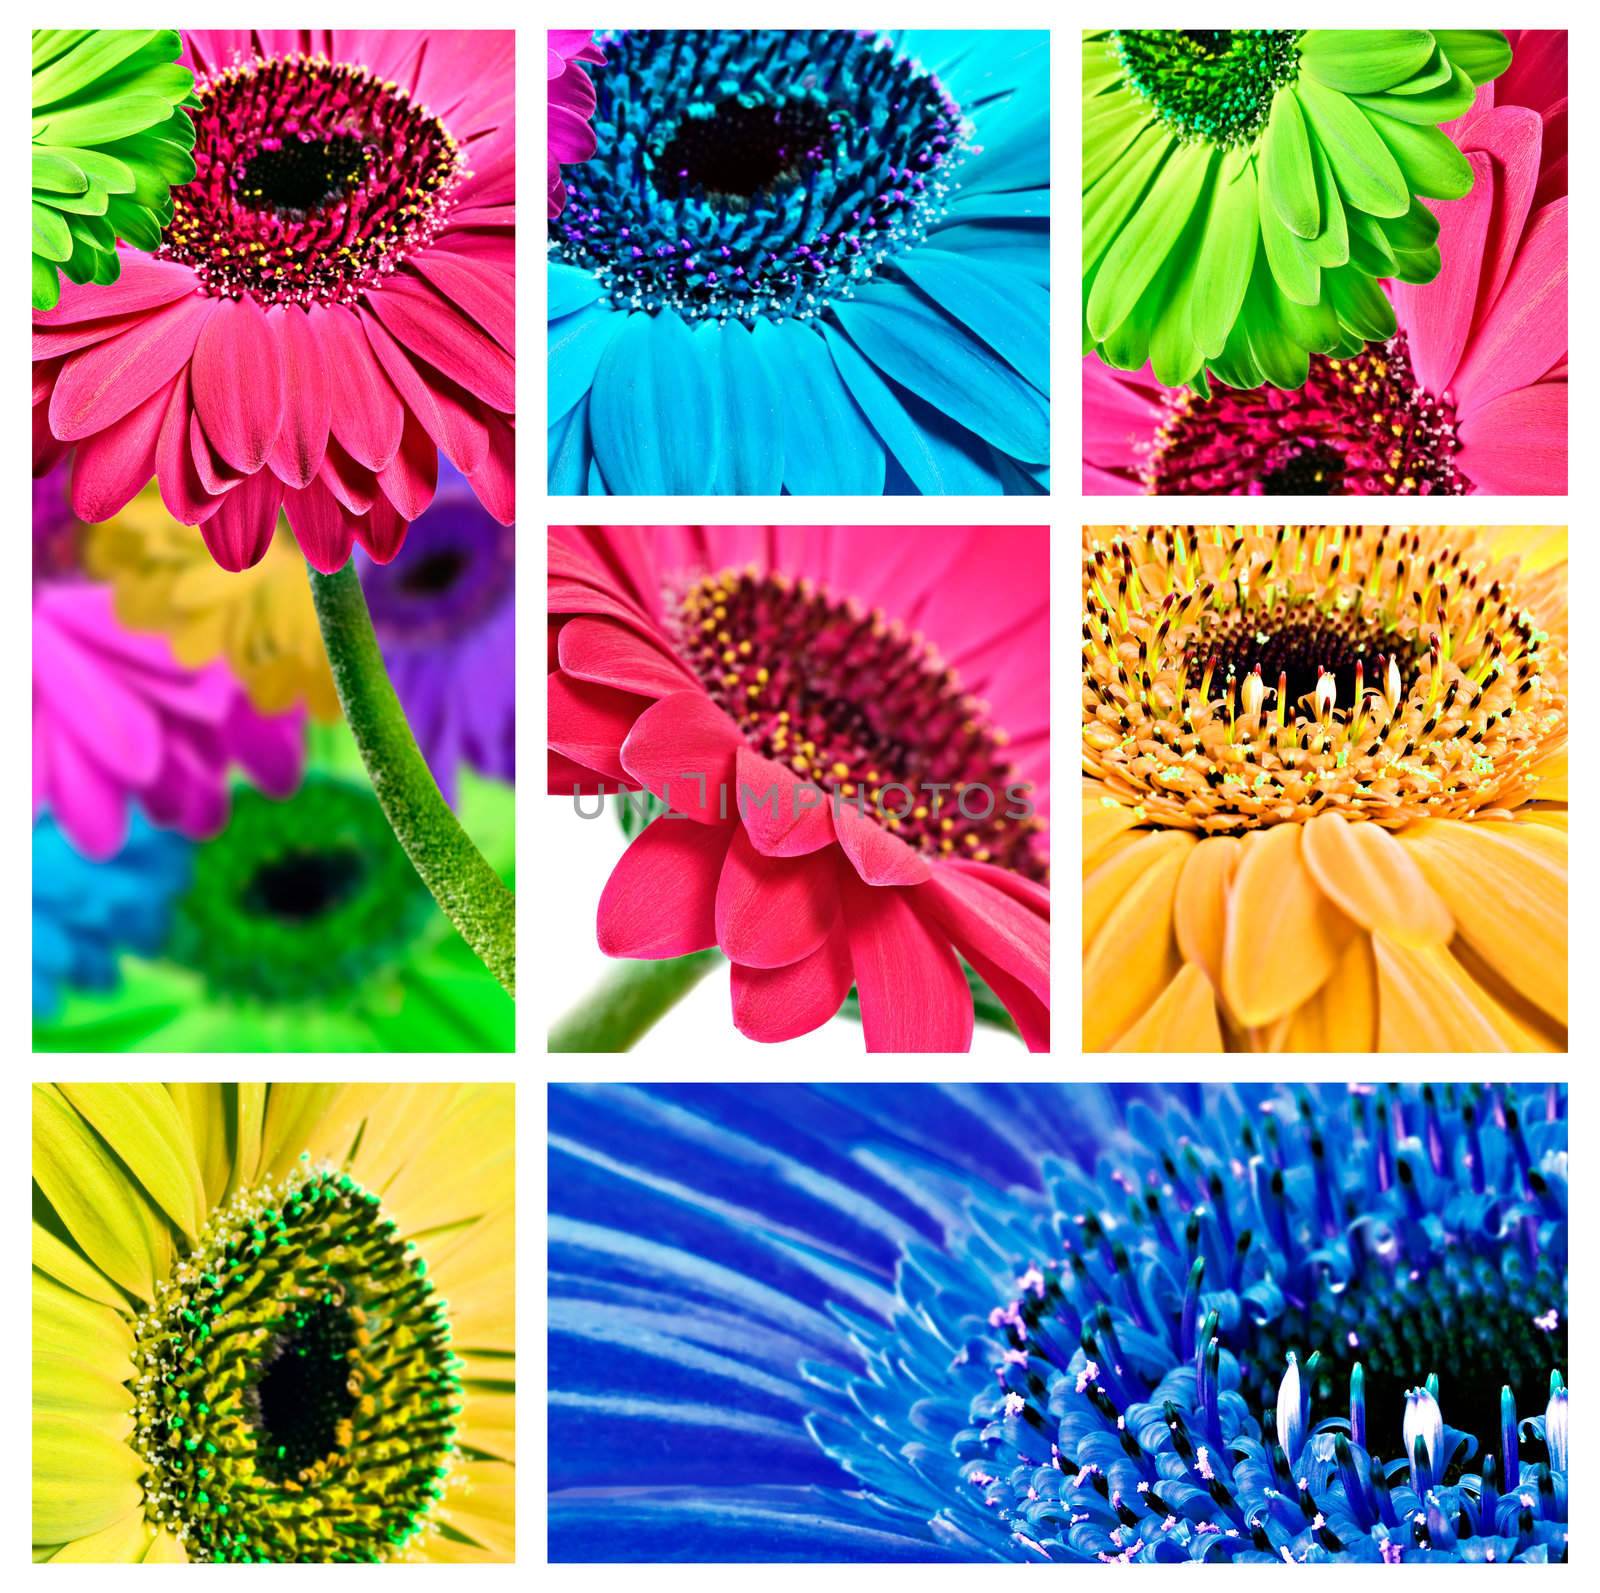 Collage of gerbera daisy close up photos by tish1